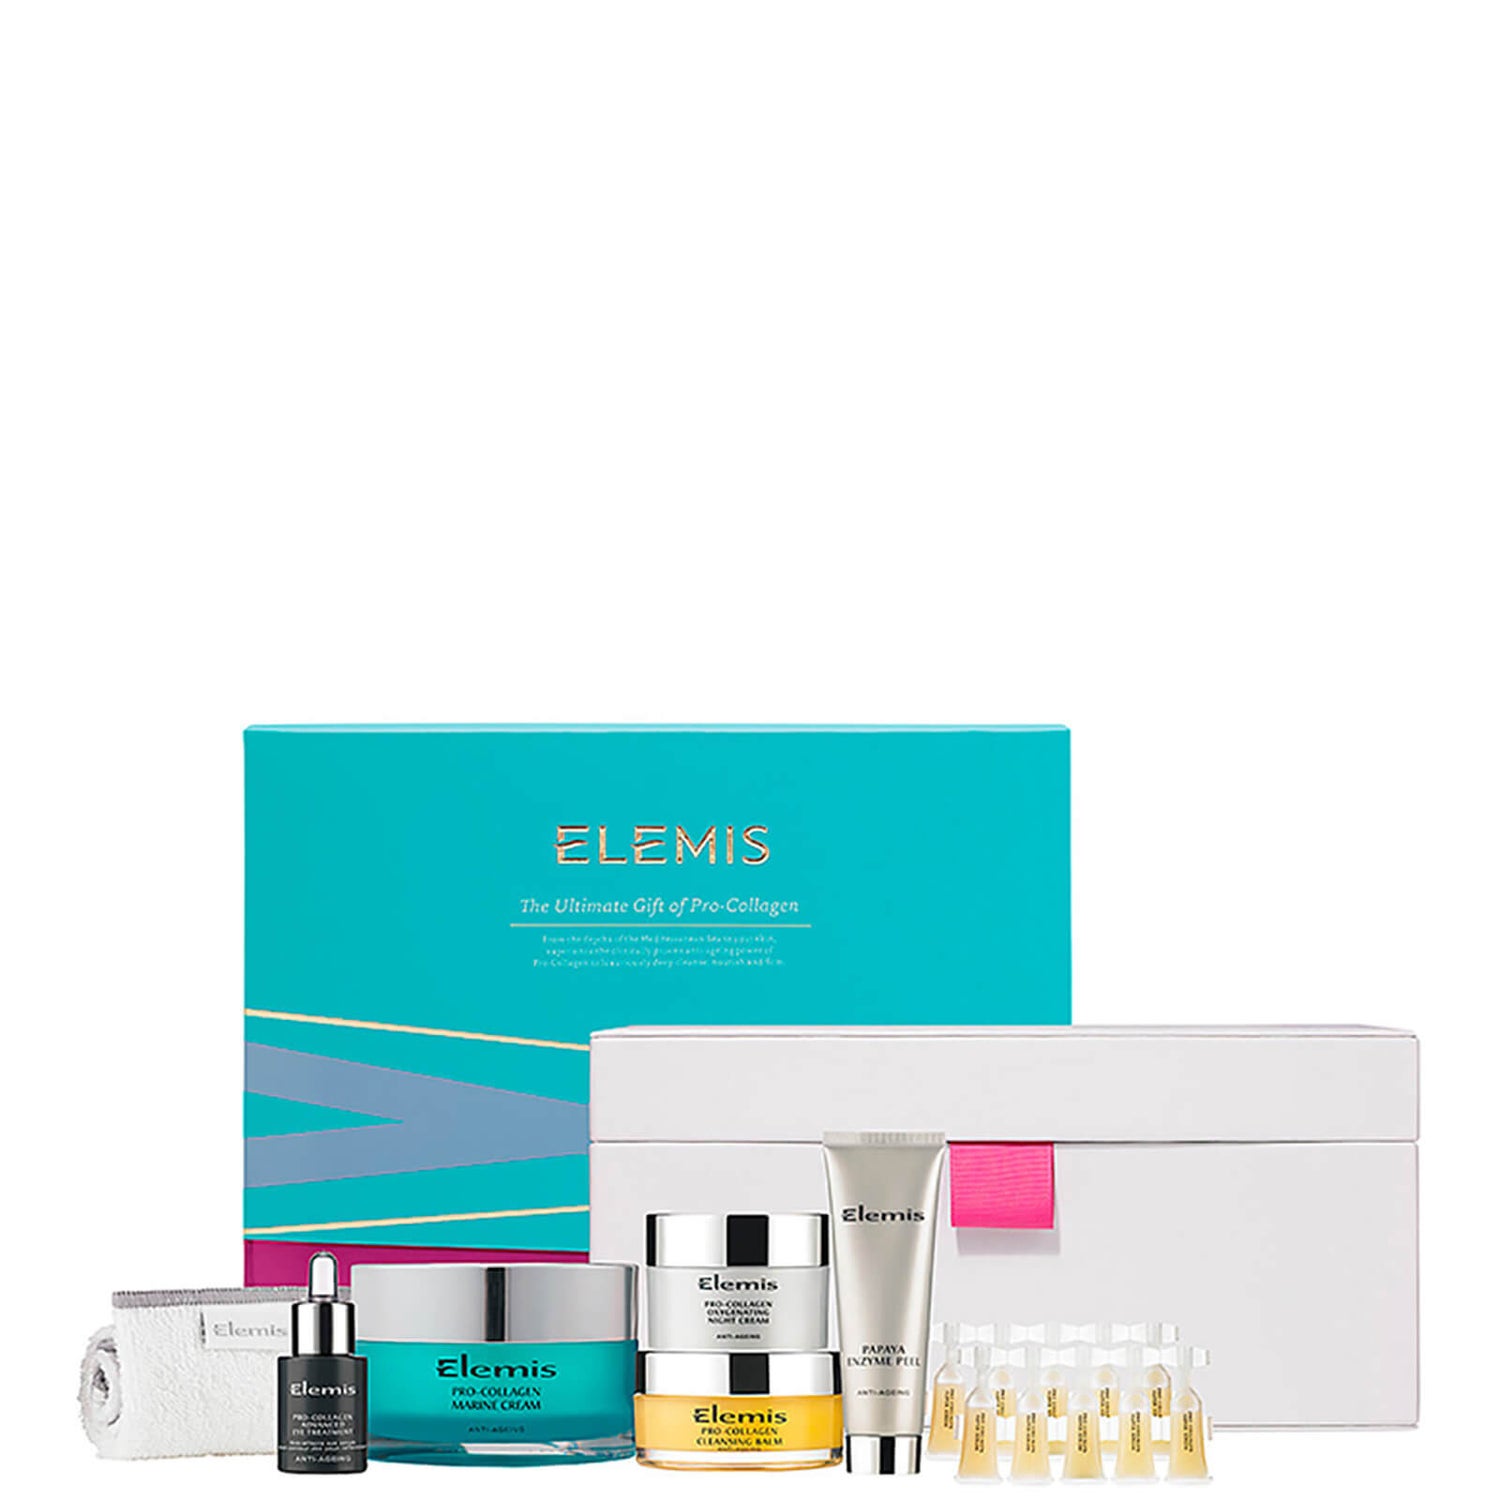 Elemis The Ultimate Gift Of Pro-Collagen (Worth: £327.00)